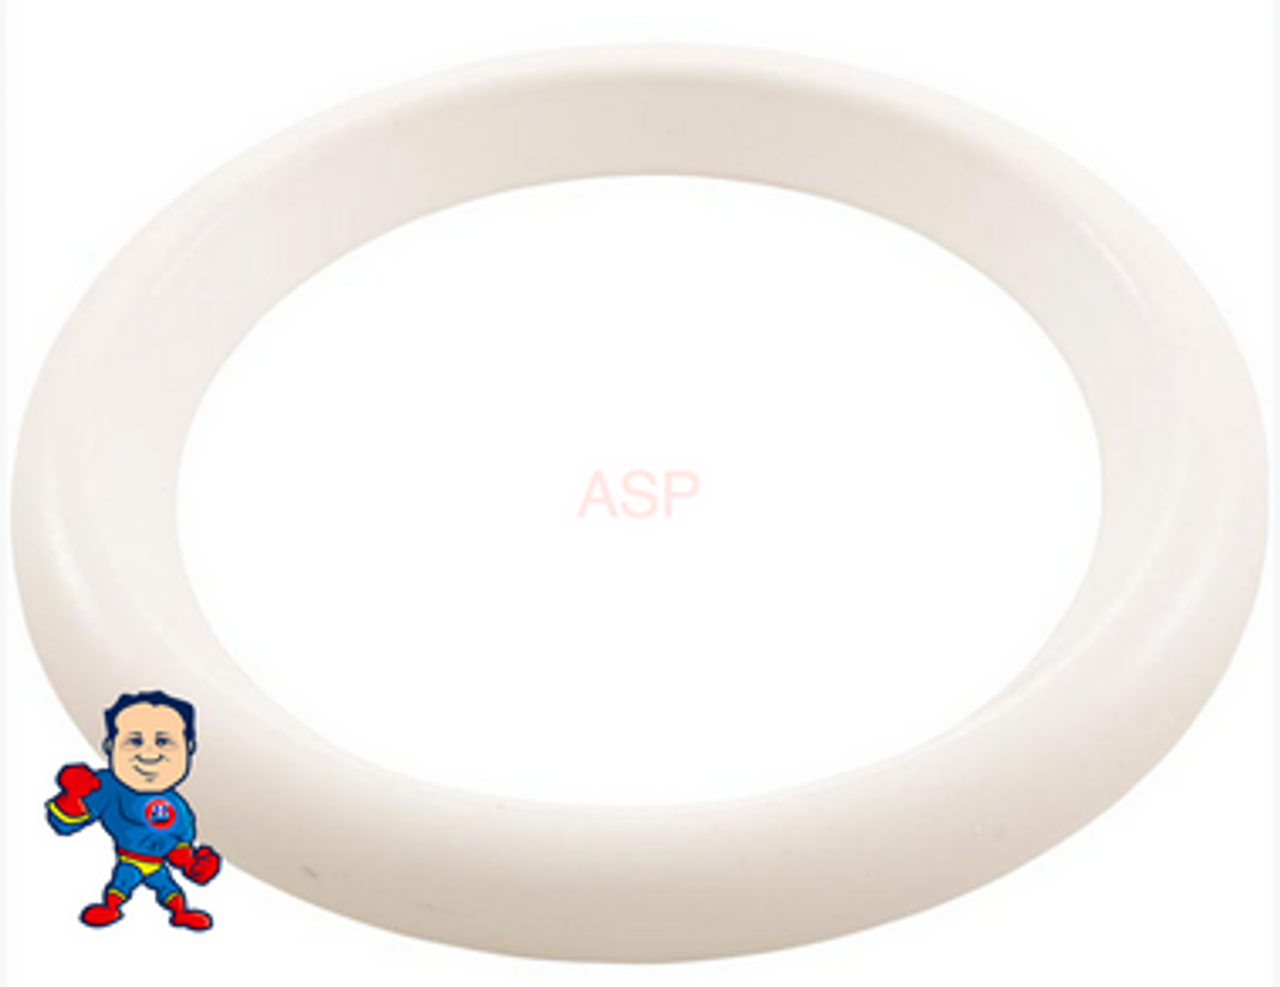 Alignment Ring, Waterway Power Storm Jet or 5" Light Lens